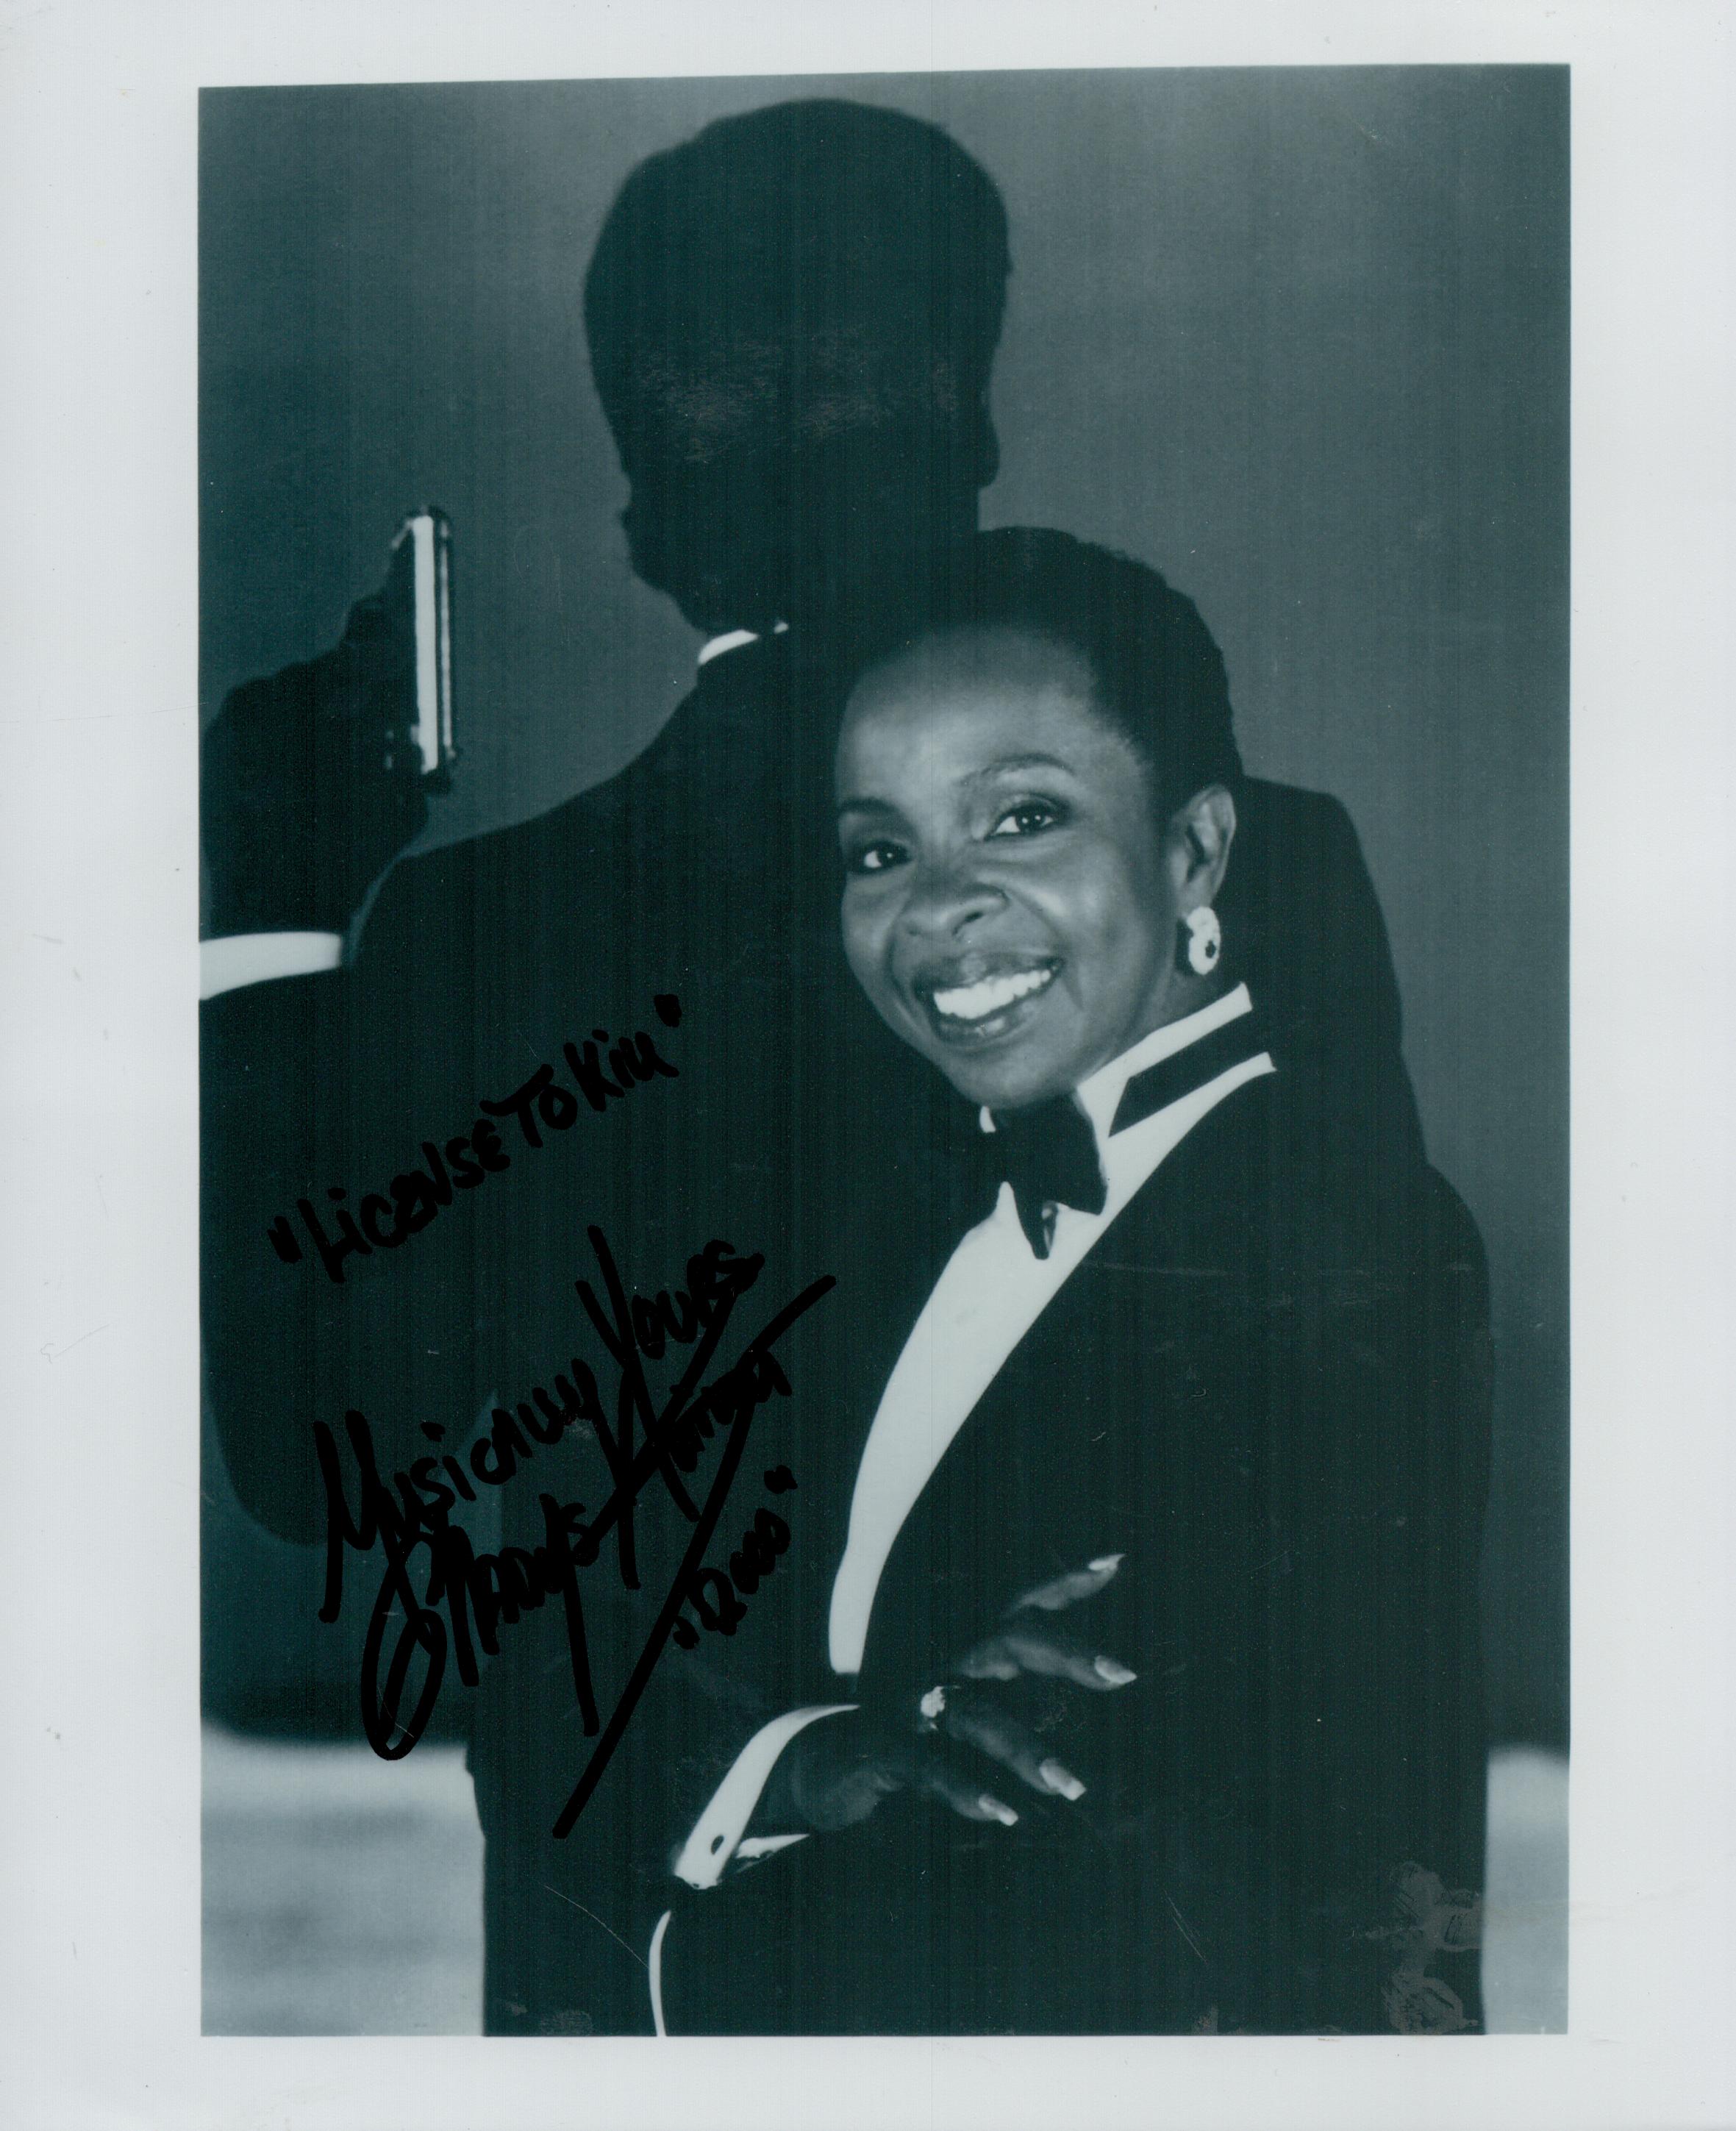 Gladys Knight signed 10x8 black and white photo. Good condition. All autographed items come with a